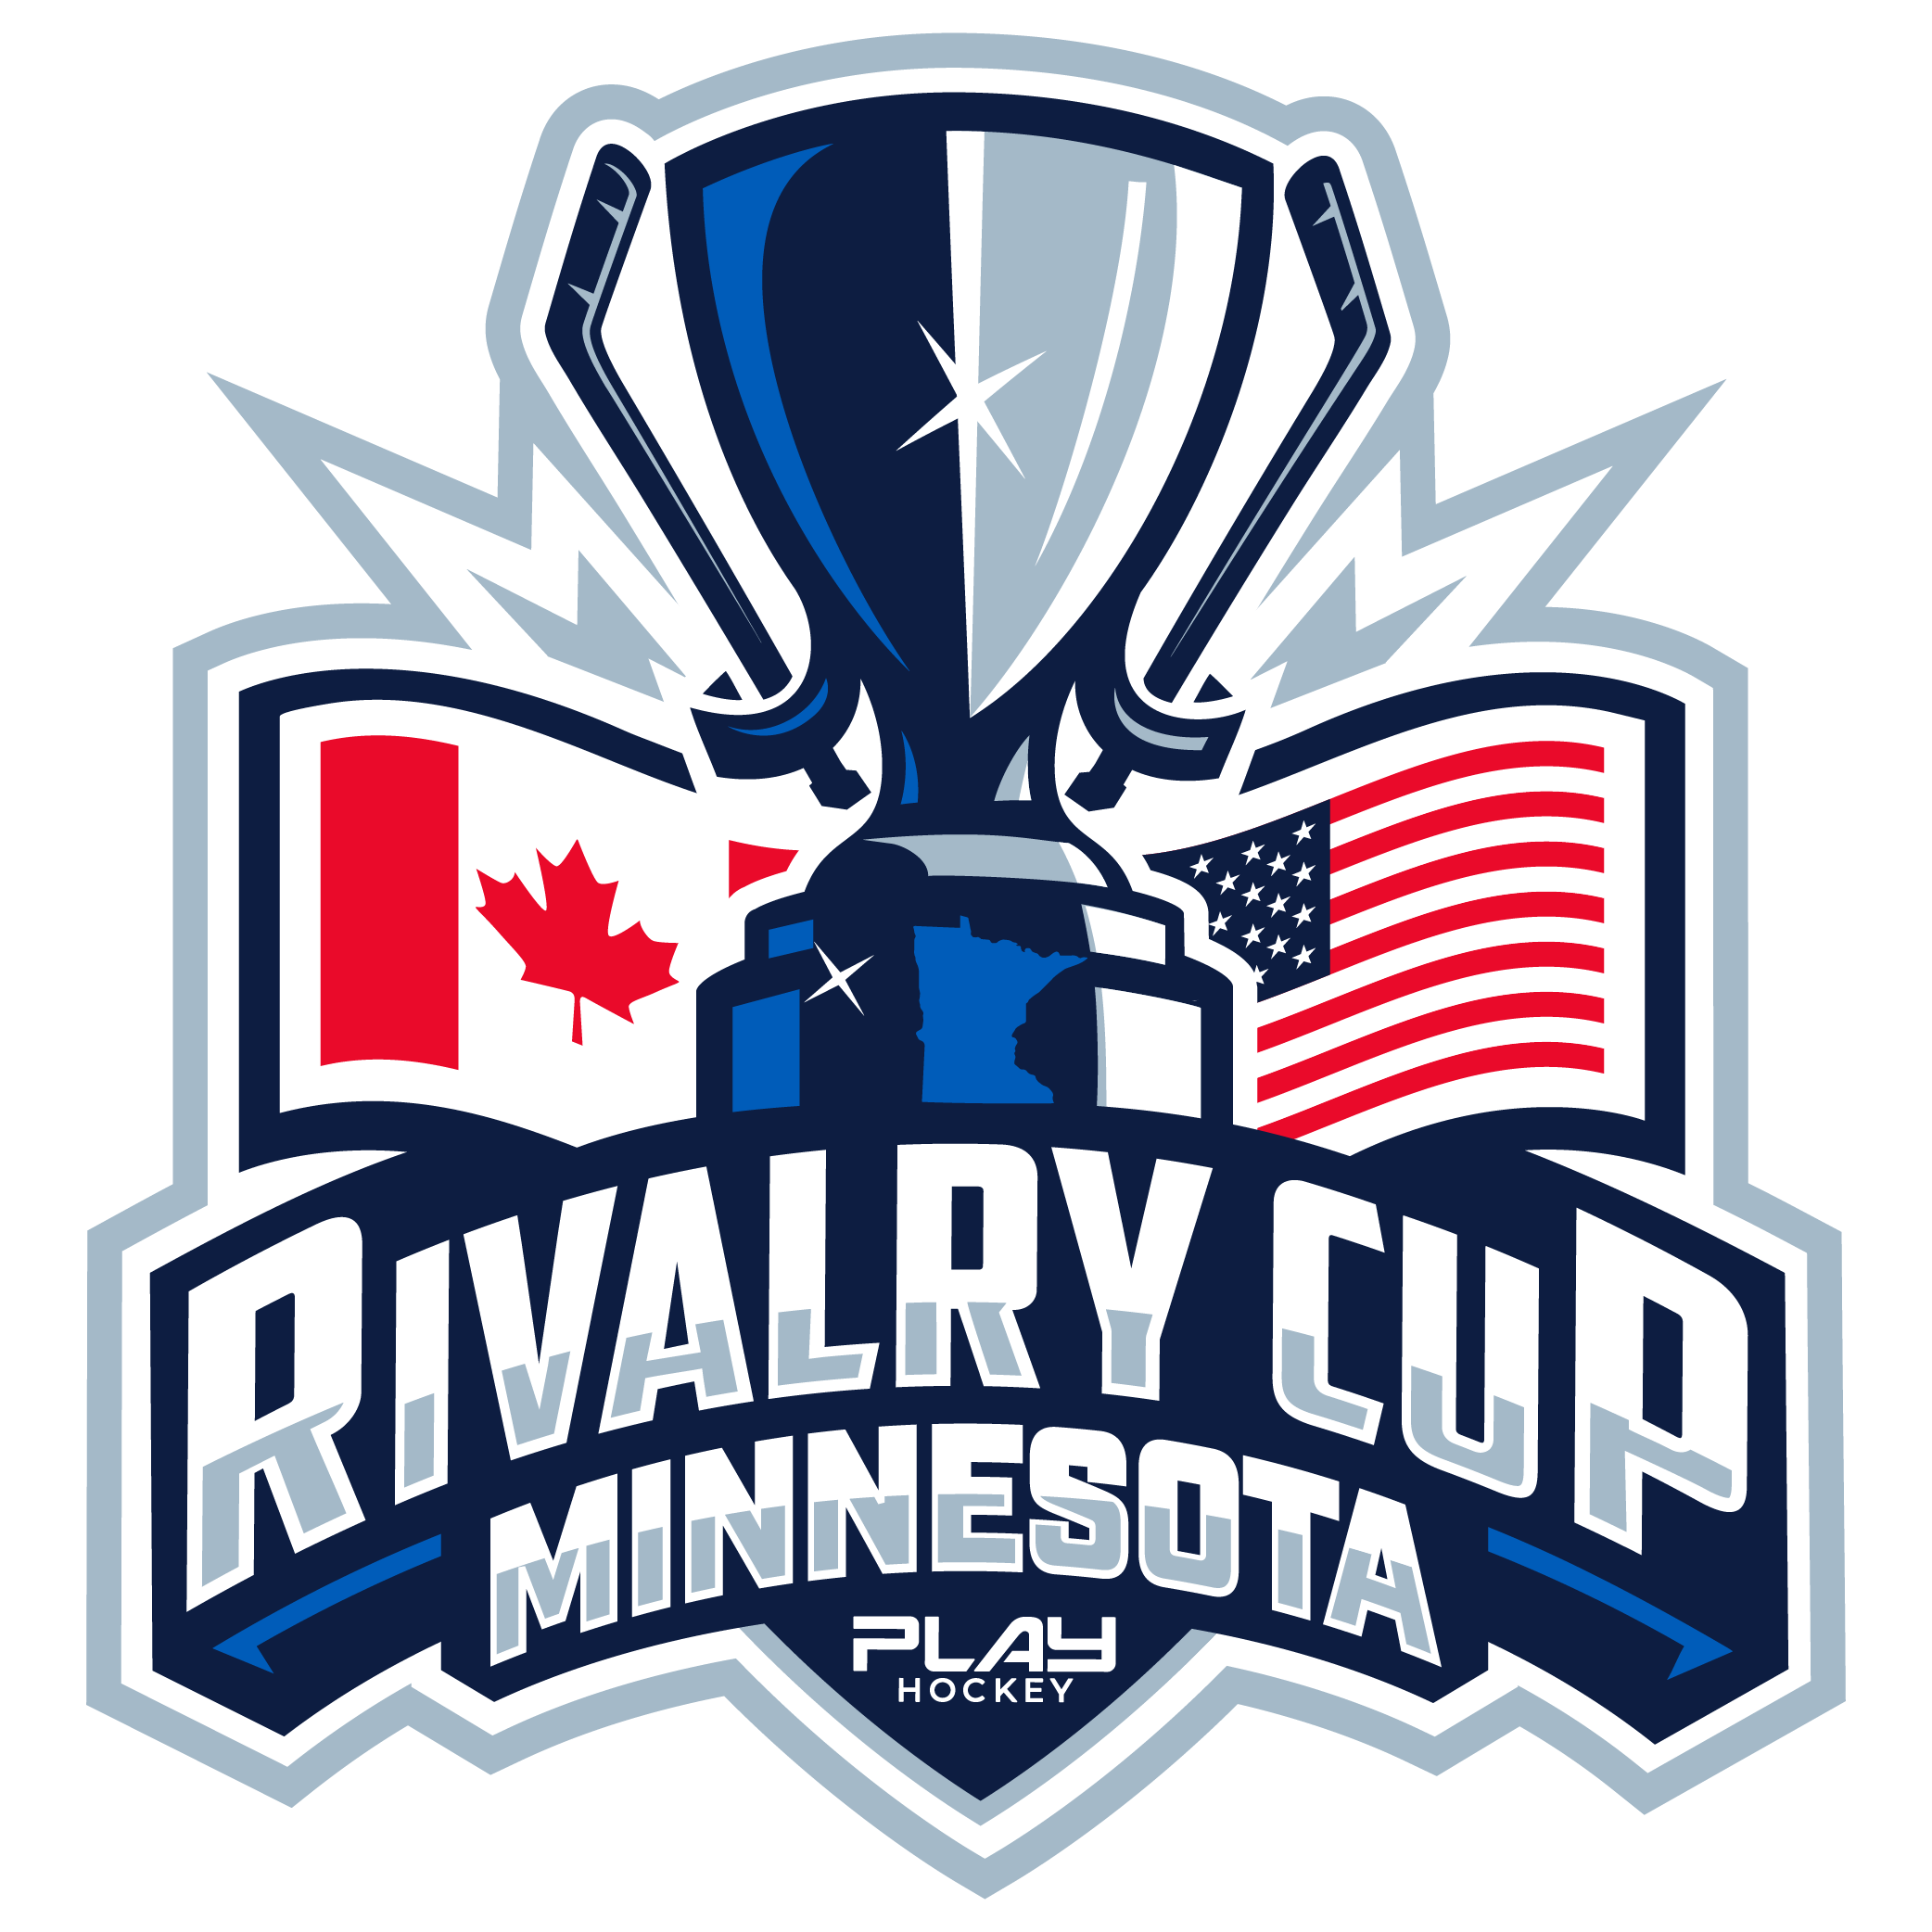 https://20502767.fs1.hubspotusercontent-na1.net/hubfs/20502767/New%20Event%20Logos/PH-Rivalry-Cup-MN-01.png